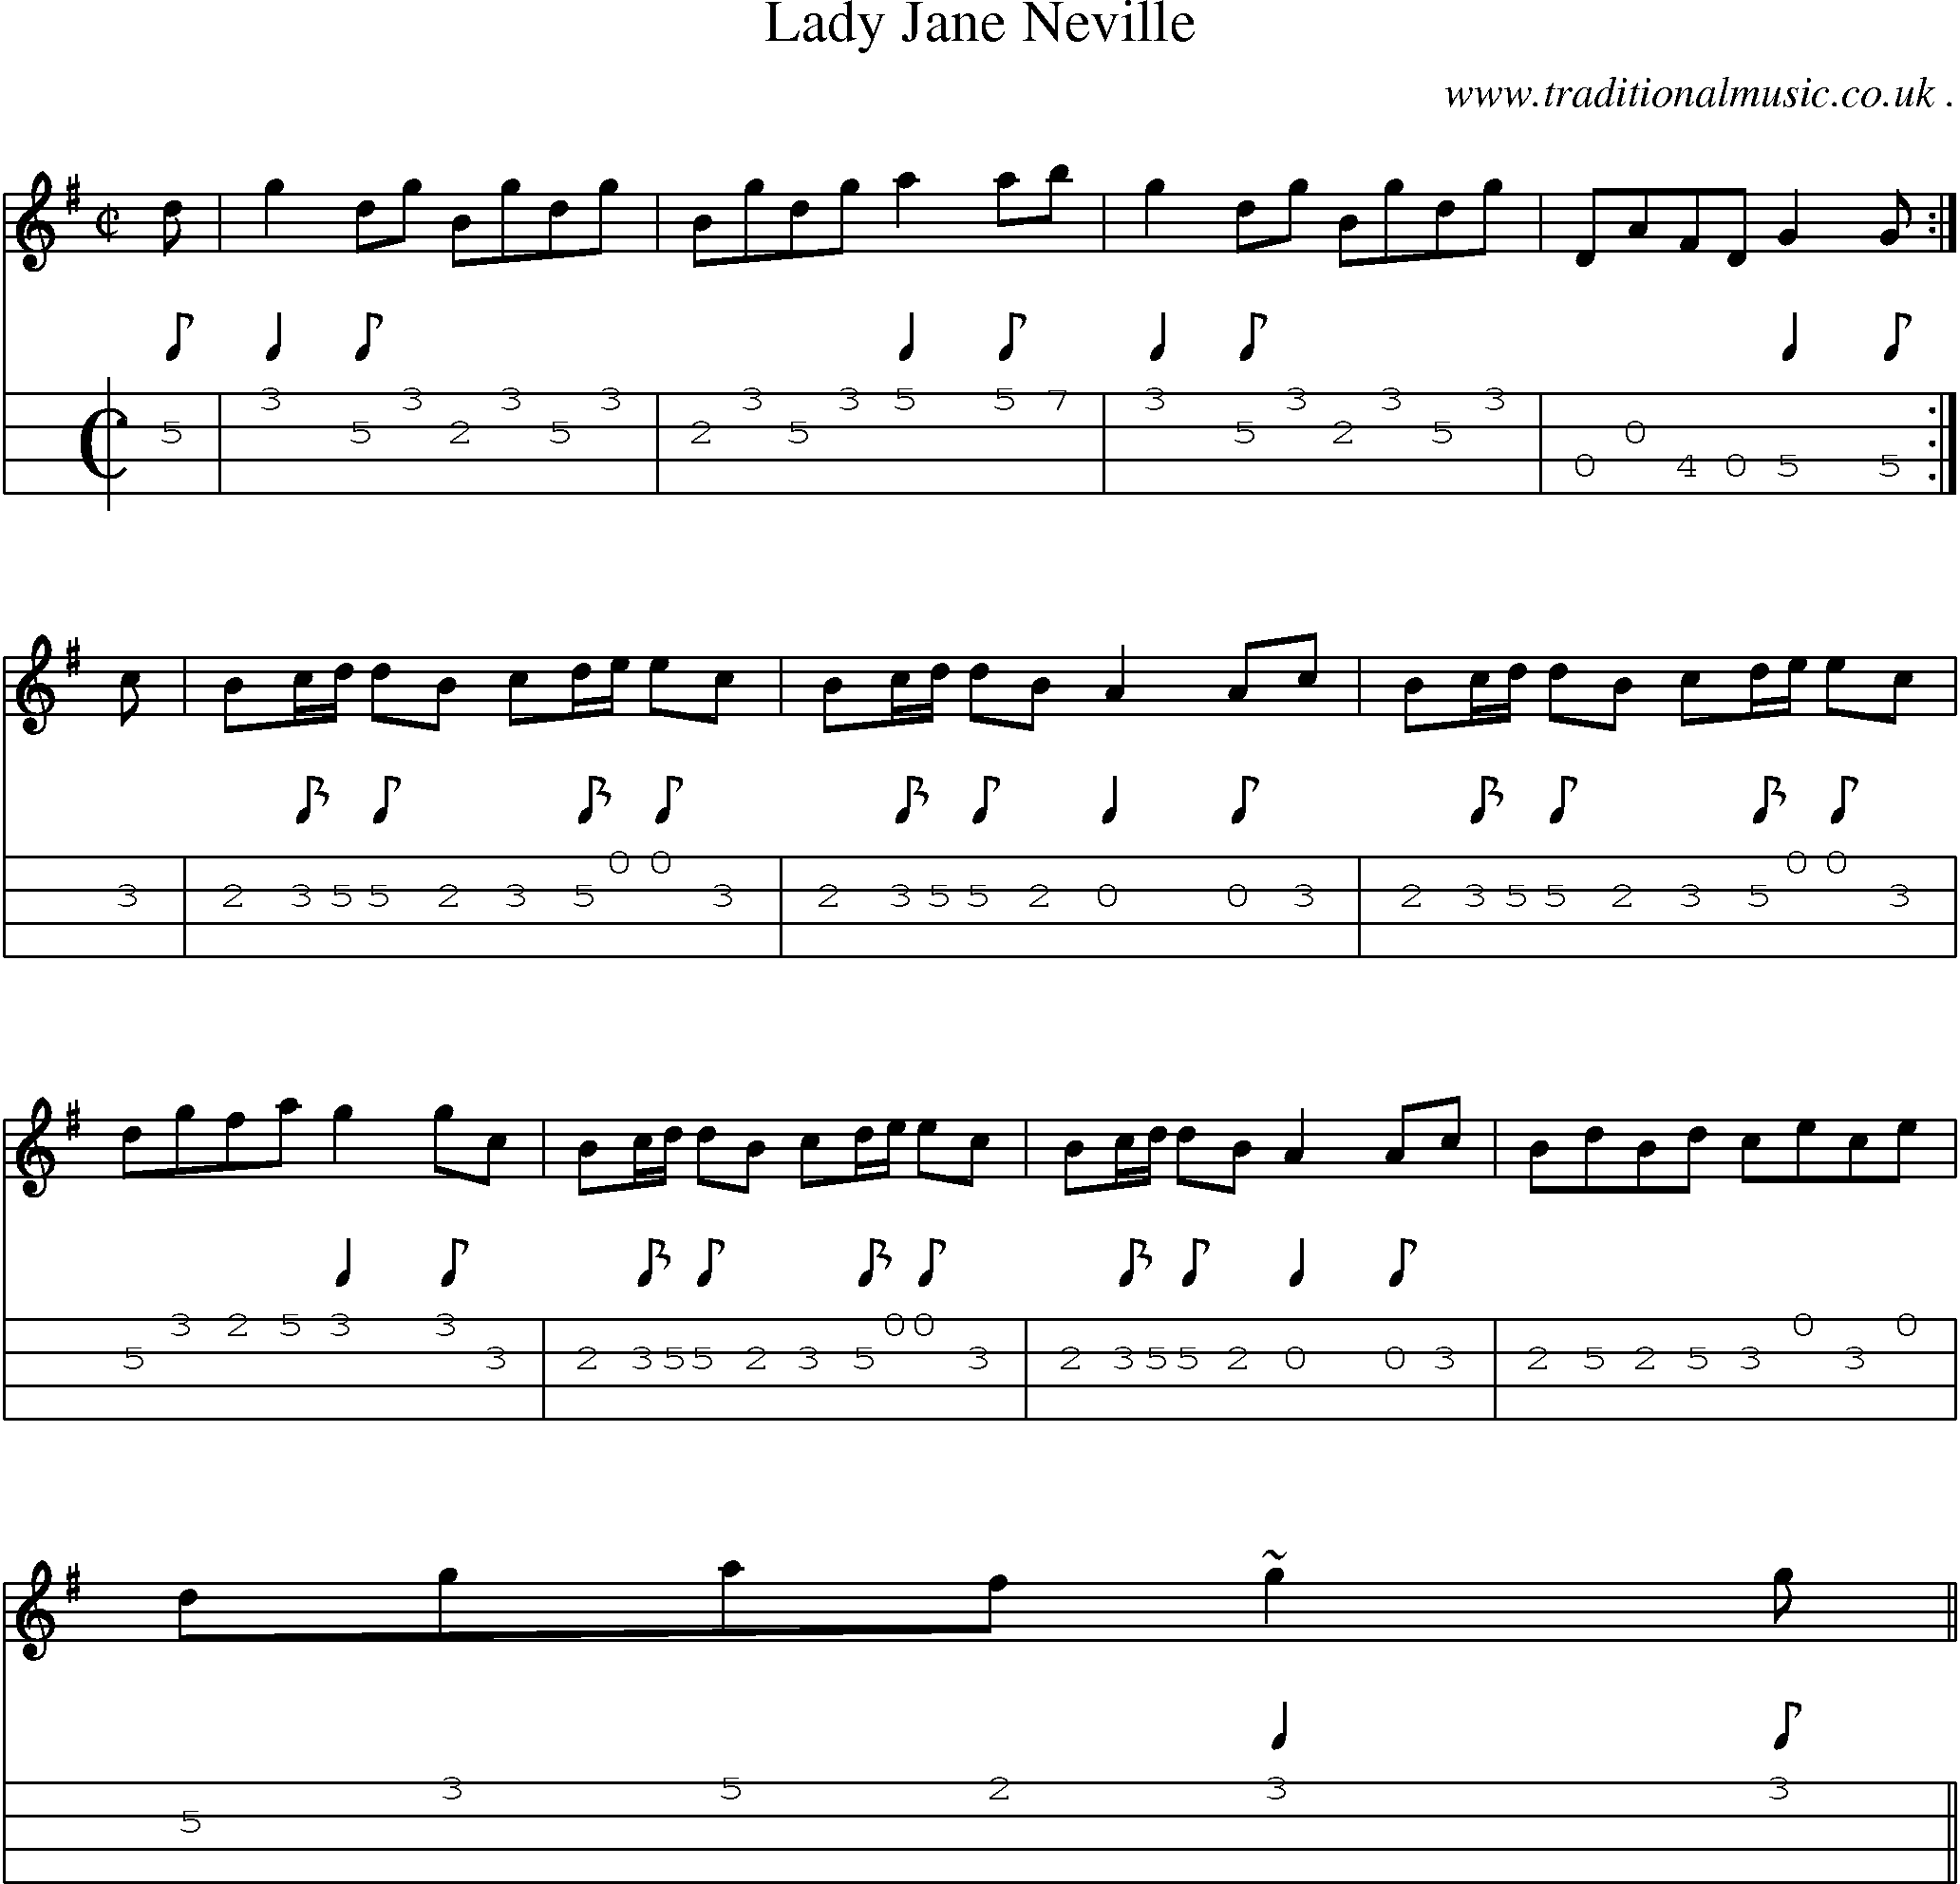 Sheet-music  score, Chords and Mandolin Tabs for Lady Jane Neville